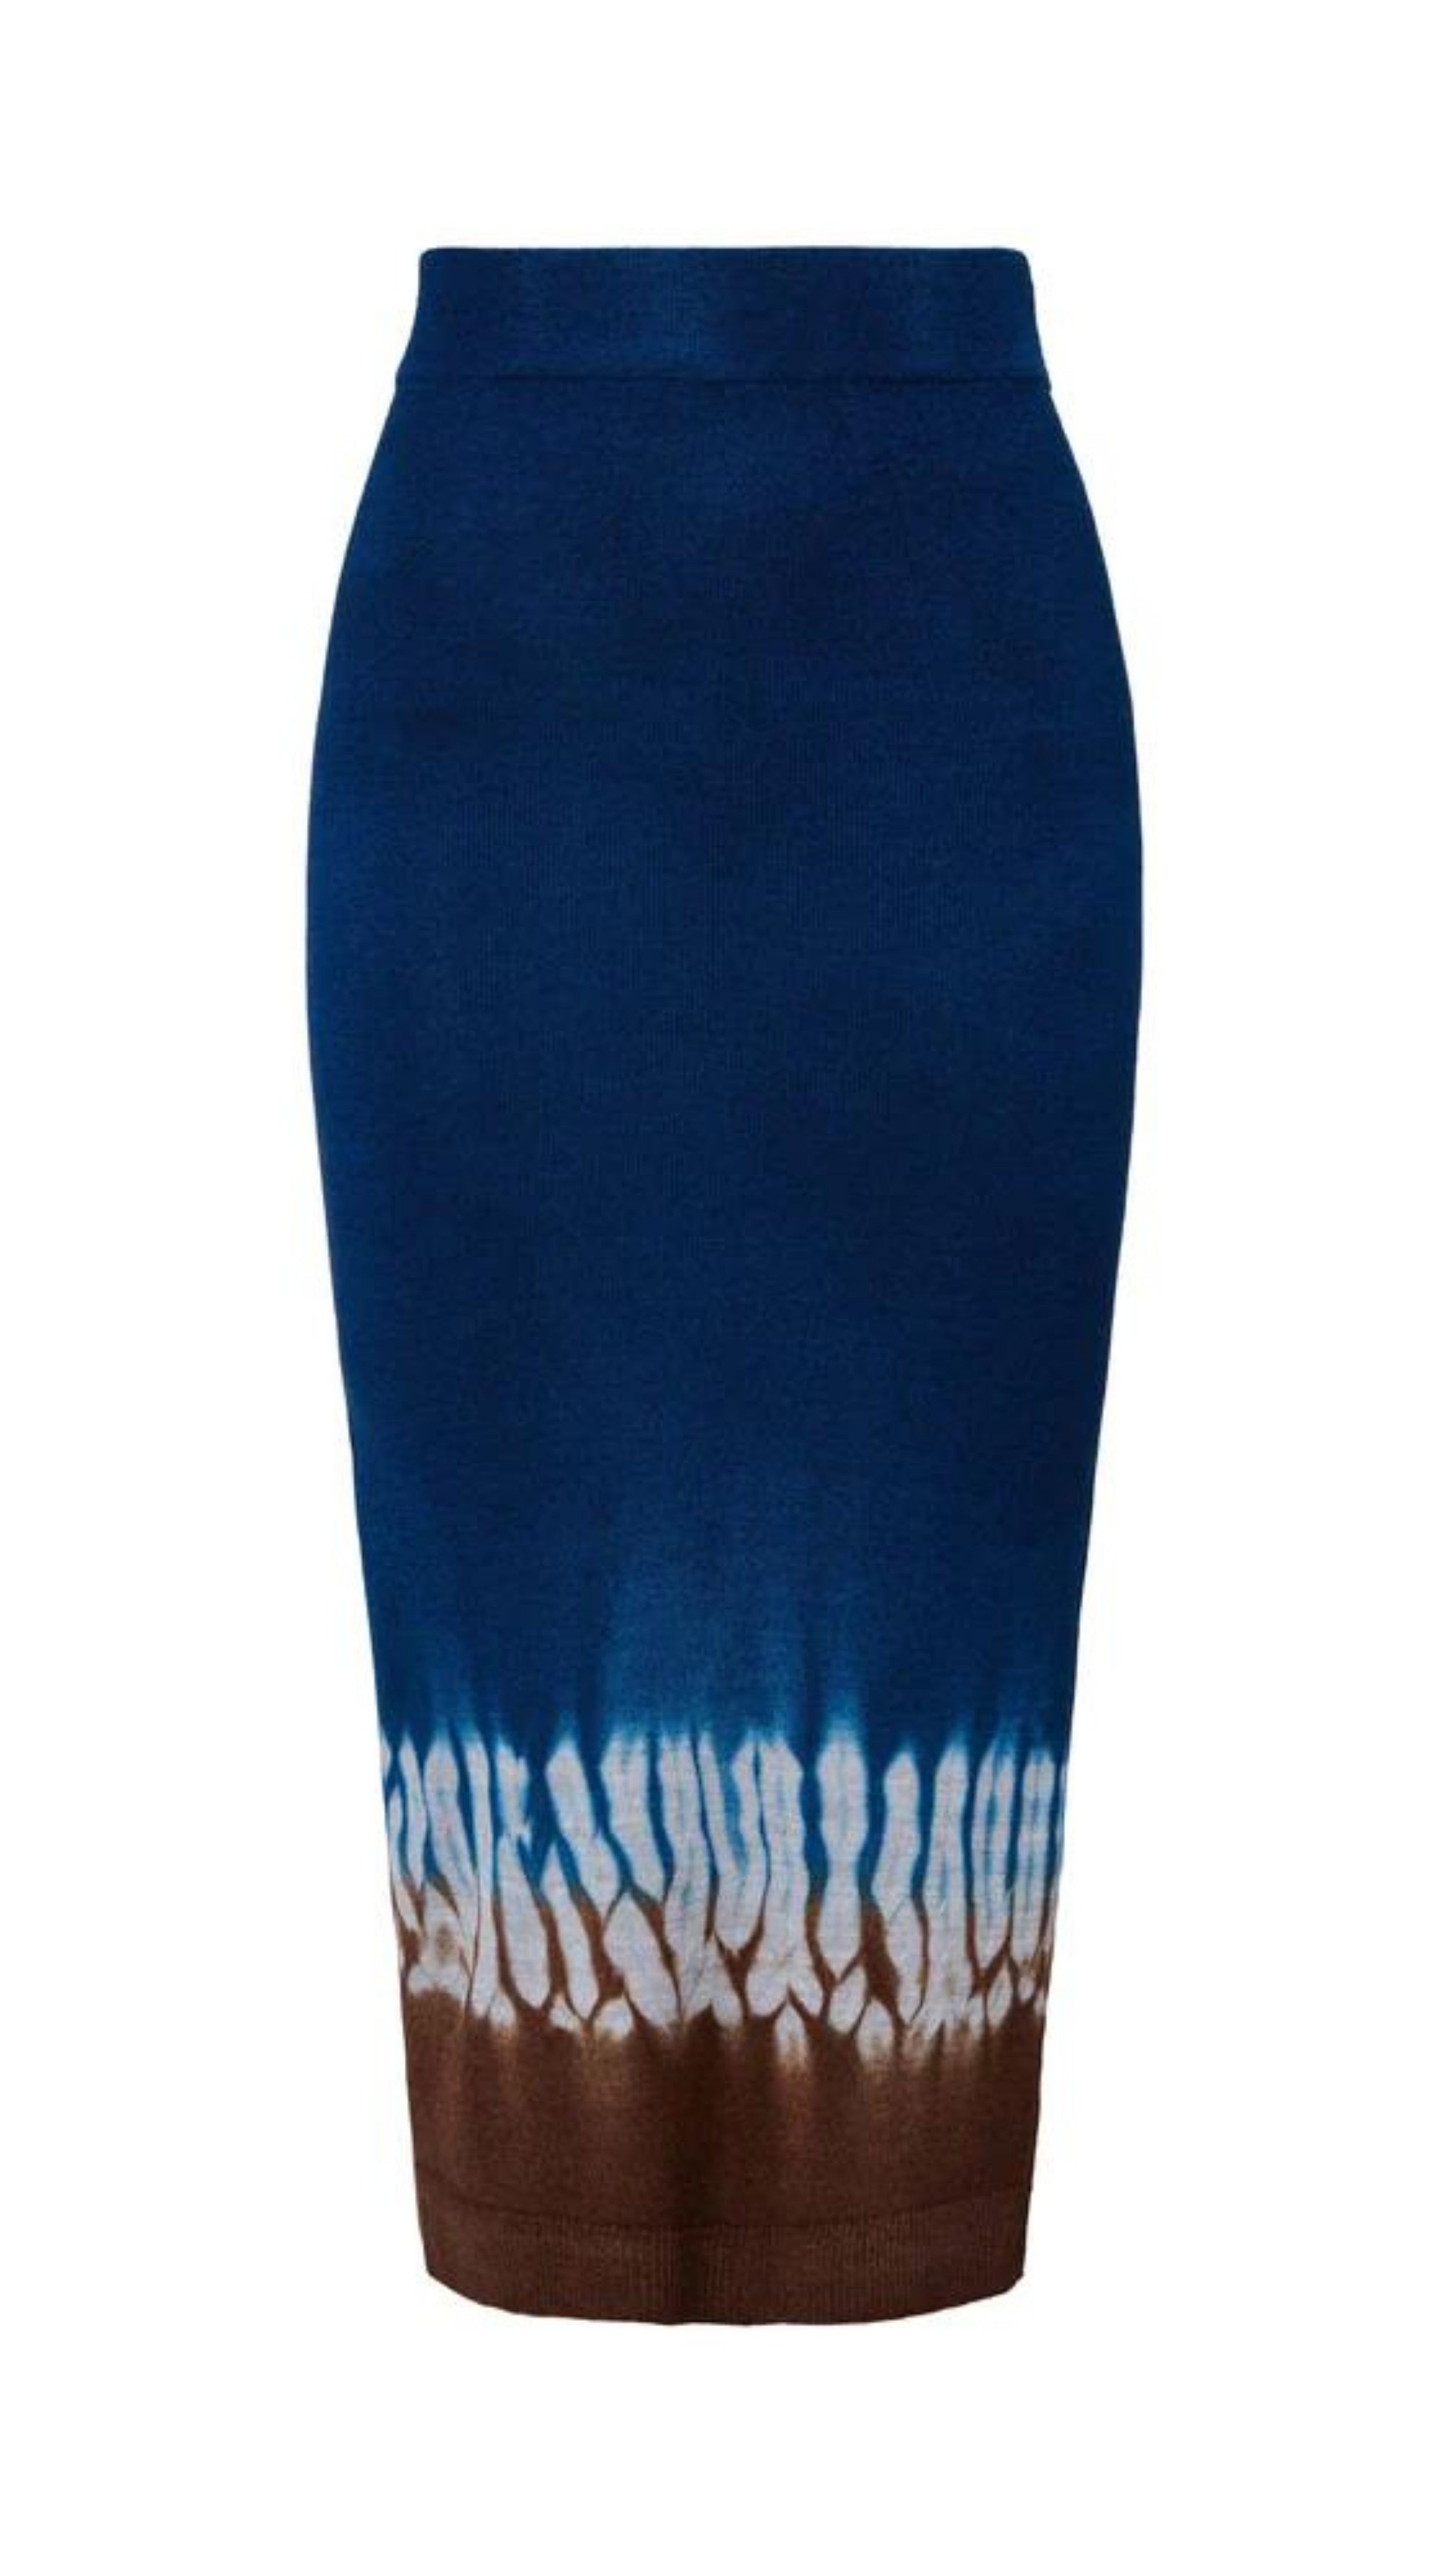 Altuzarra 'Morse' skirt, featuring Altuzarra's iconic Shibori tie-dye technique in brown, white, and blue. Made from 100% Superfine Merino 130's wool, this high-rise pencil silhouette midi length skirt. Product photo shown flat